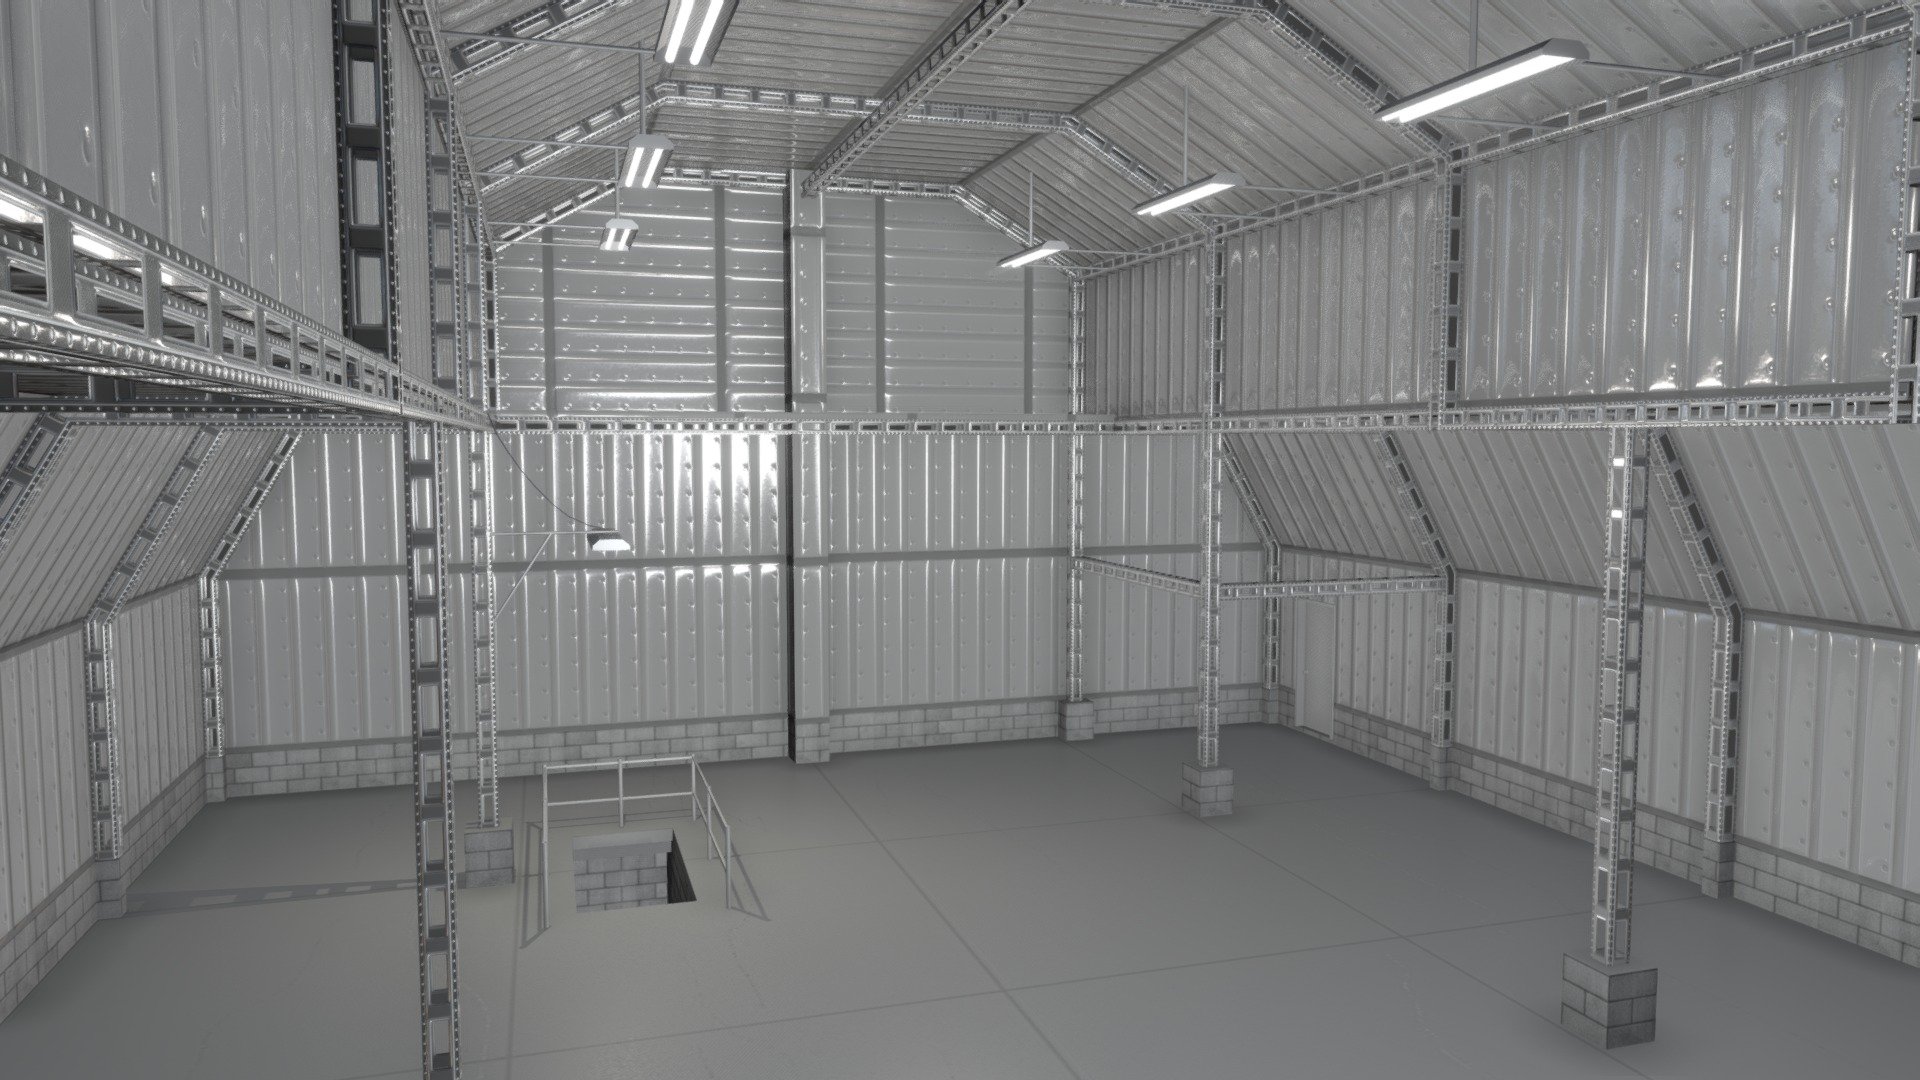 Low Poly Warehouse
Empty warehouse.  Check out my other warehouses also 3d model